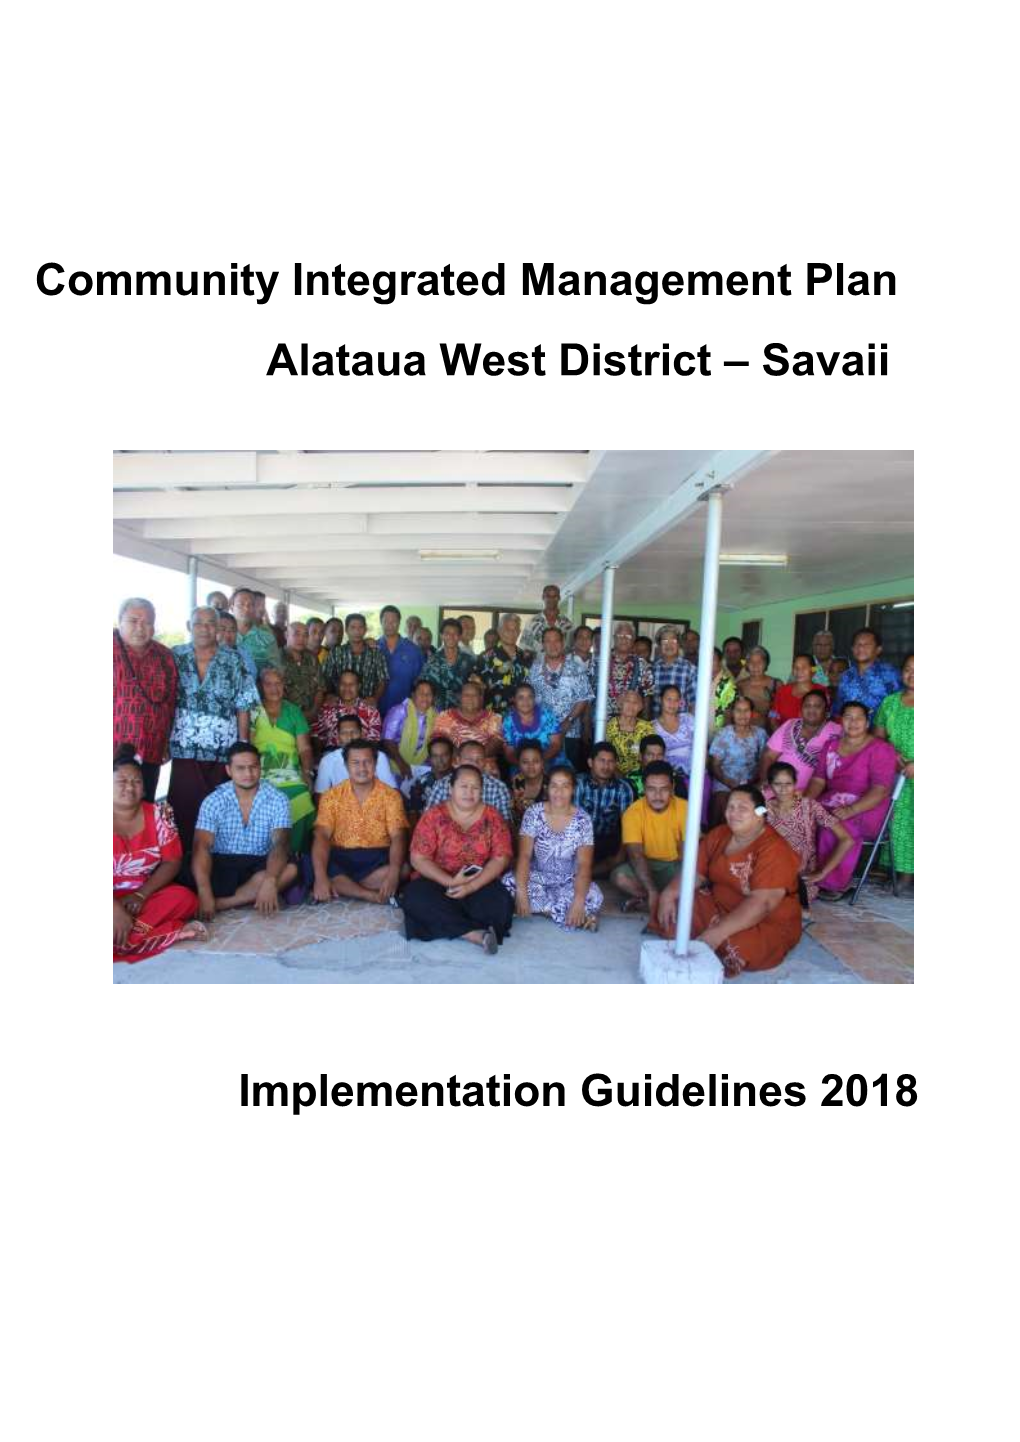 Implementation Guidelines 2018 Community Integrated Management